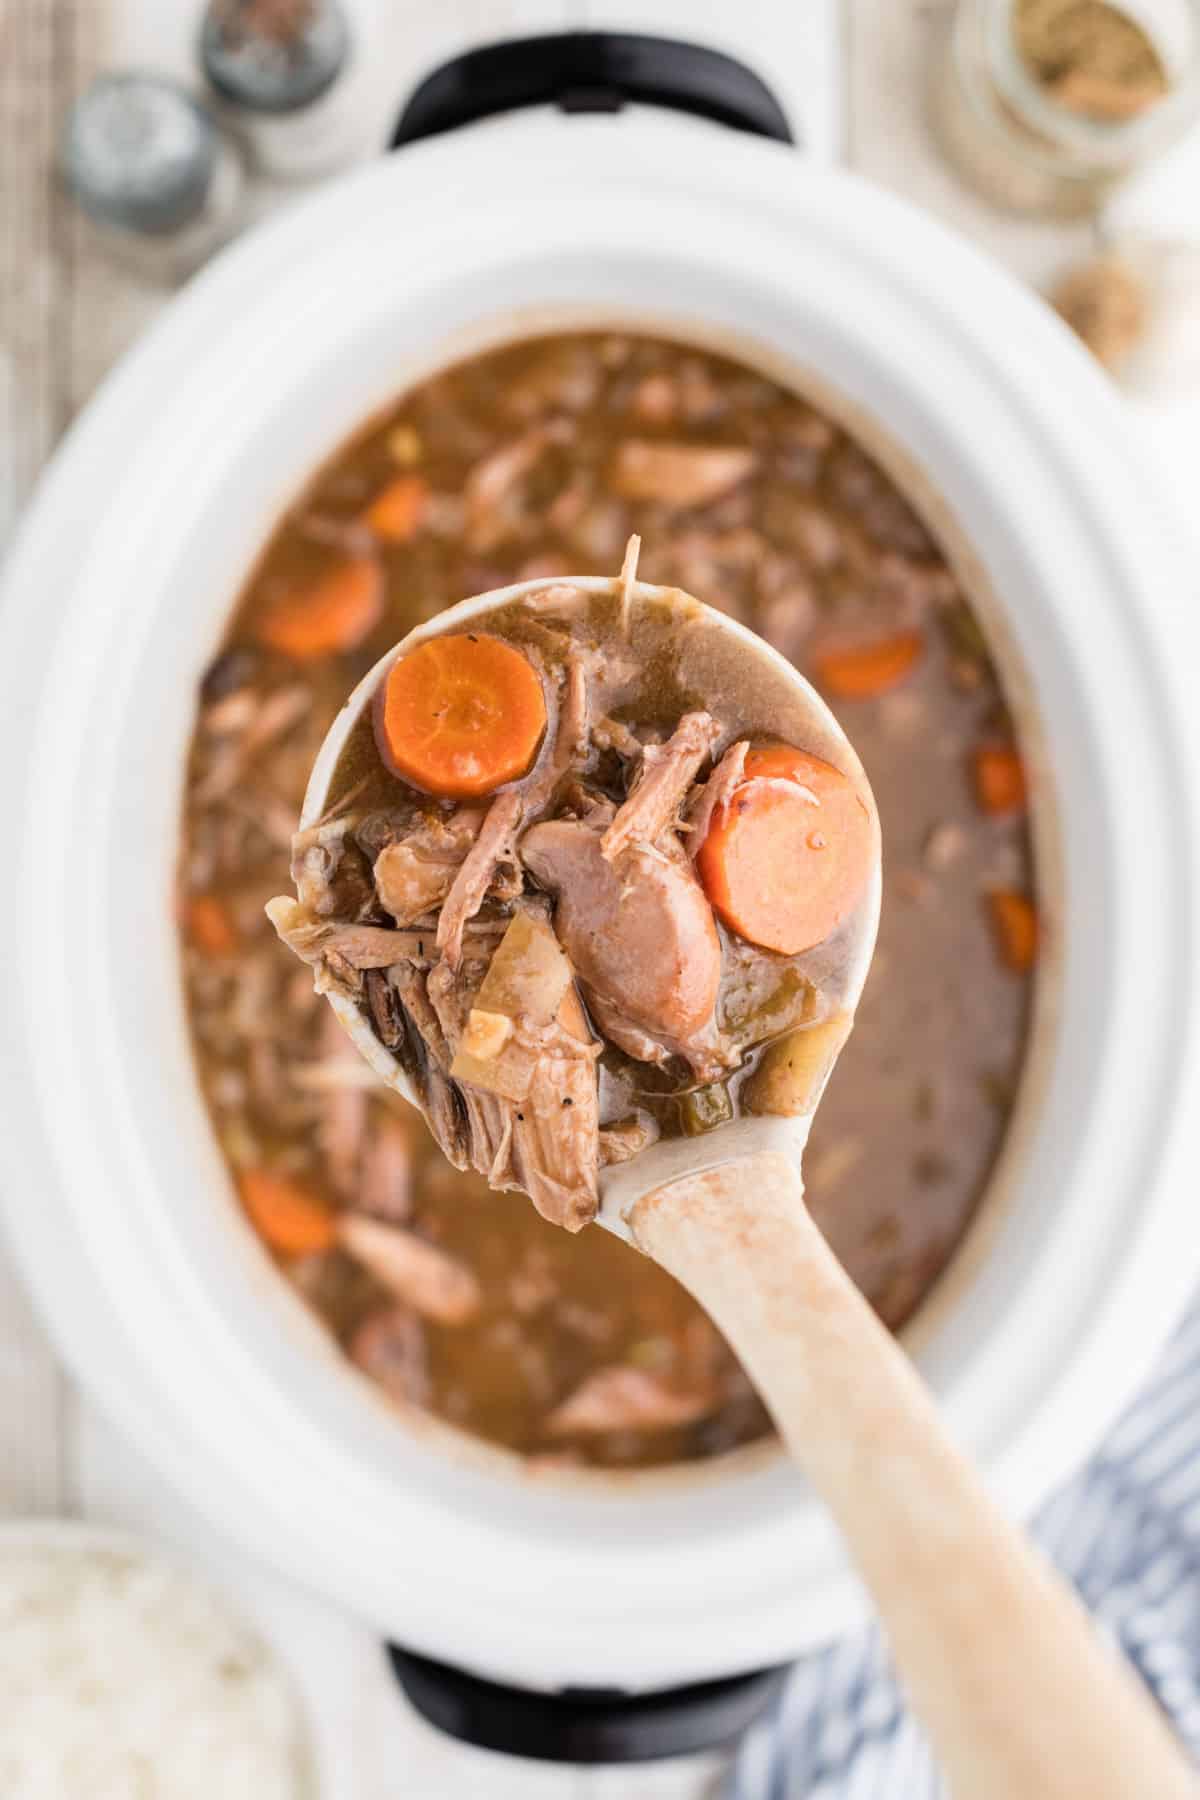 A slow cooker rabbit stew with a ladle pulling some out.